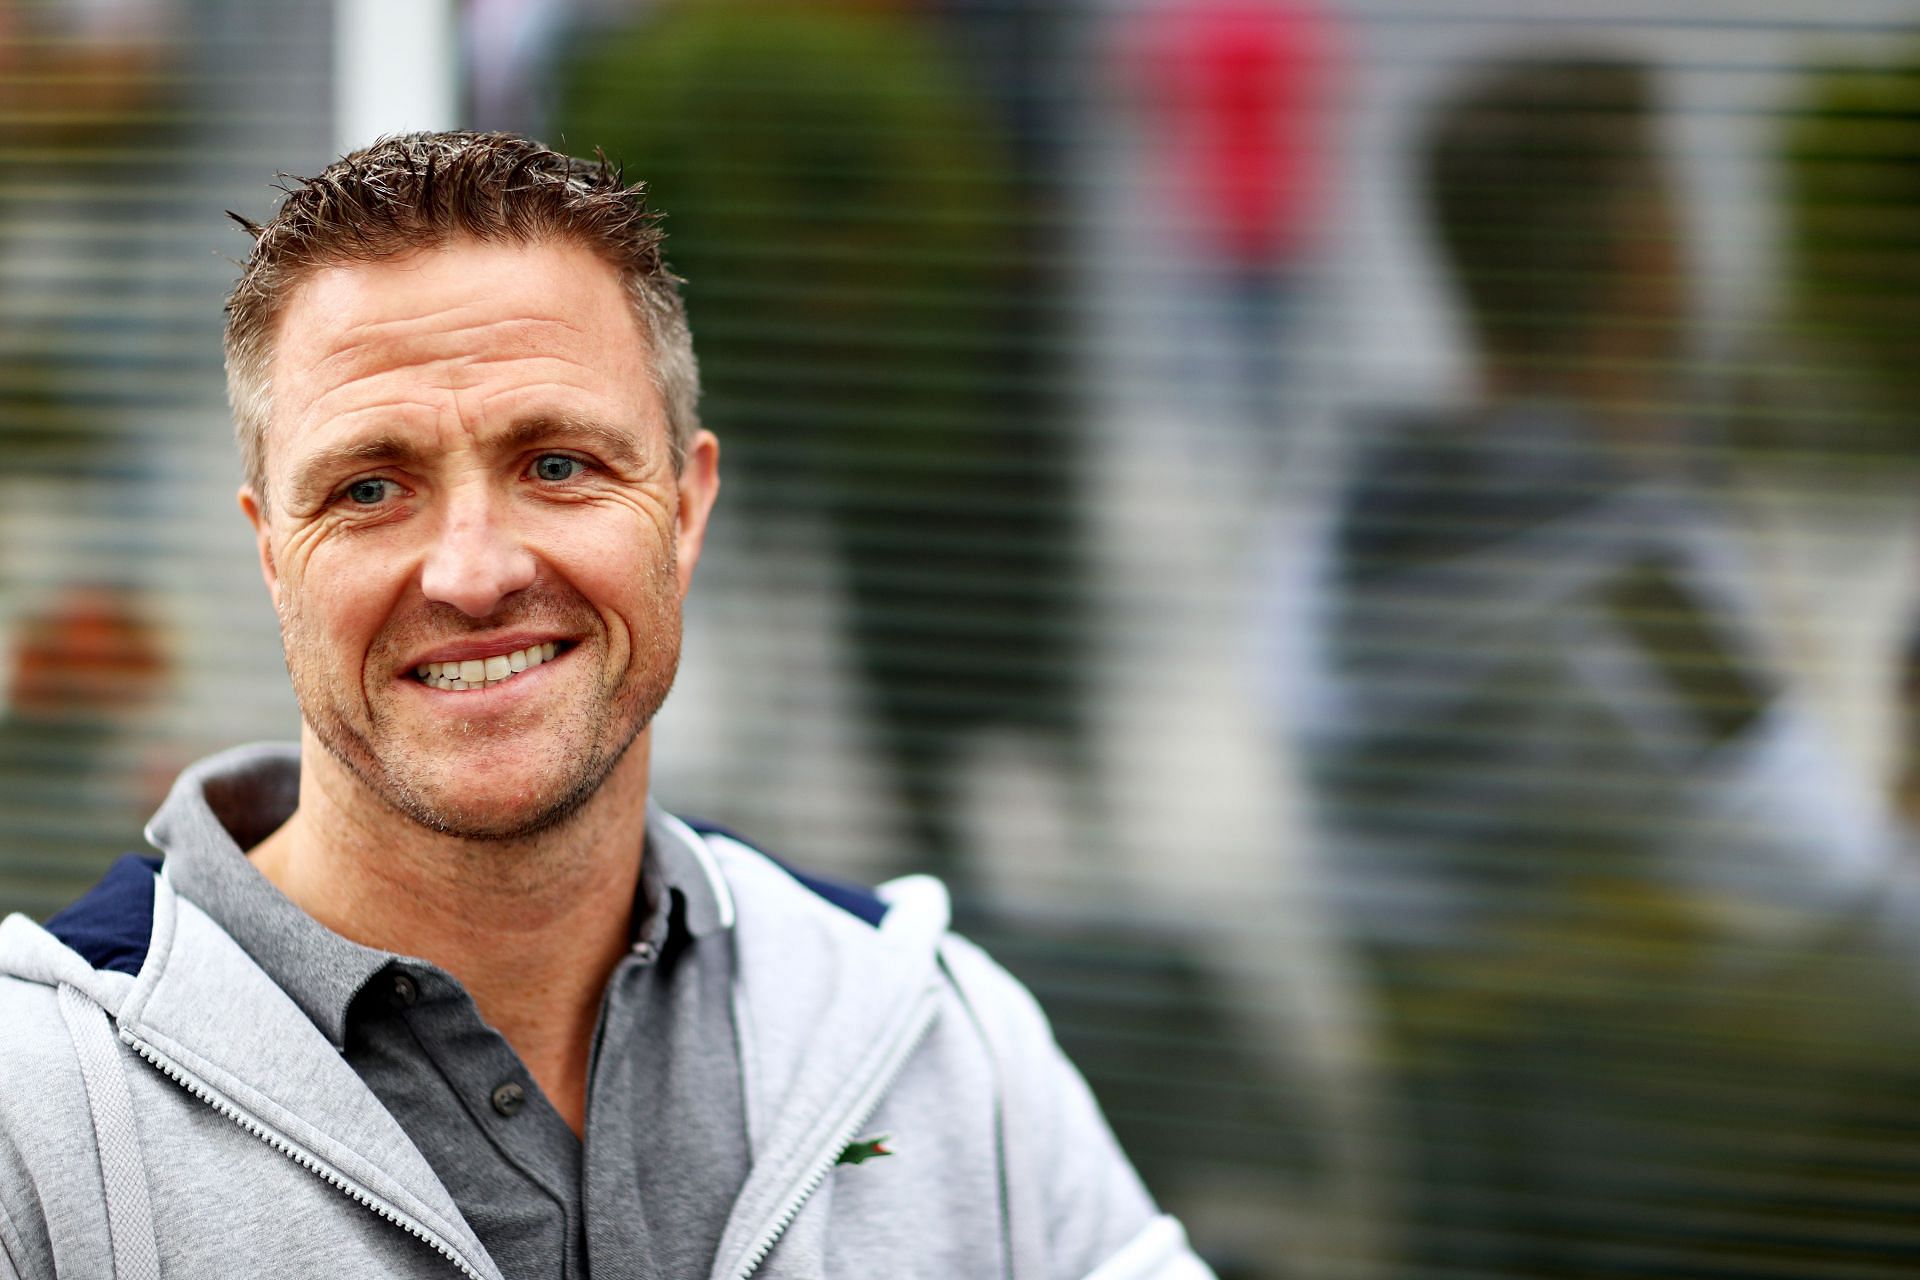 Former F1 driver Ralf Schumacher looks on in the Paddock during previews ahead of the F1 Grand Prix of Russia in Sochi (Photo by Mark Thompson/Getty Images)